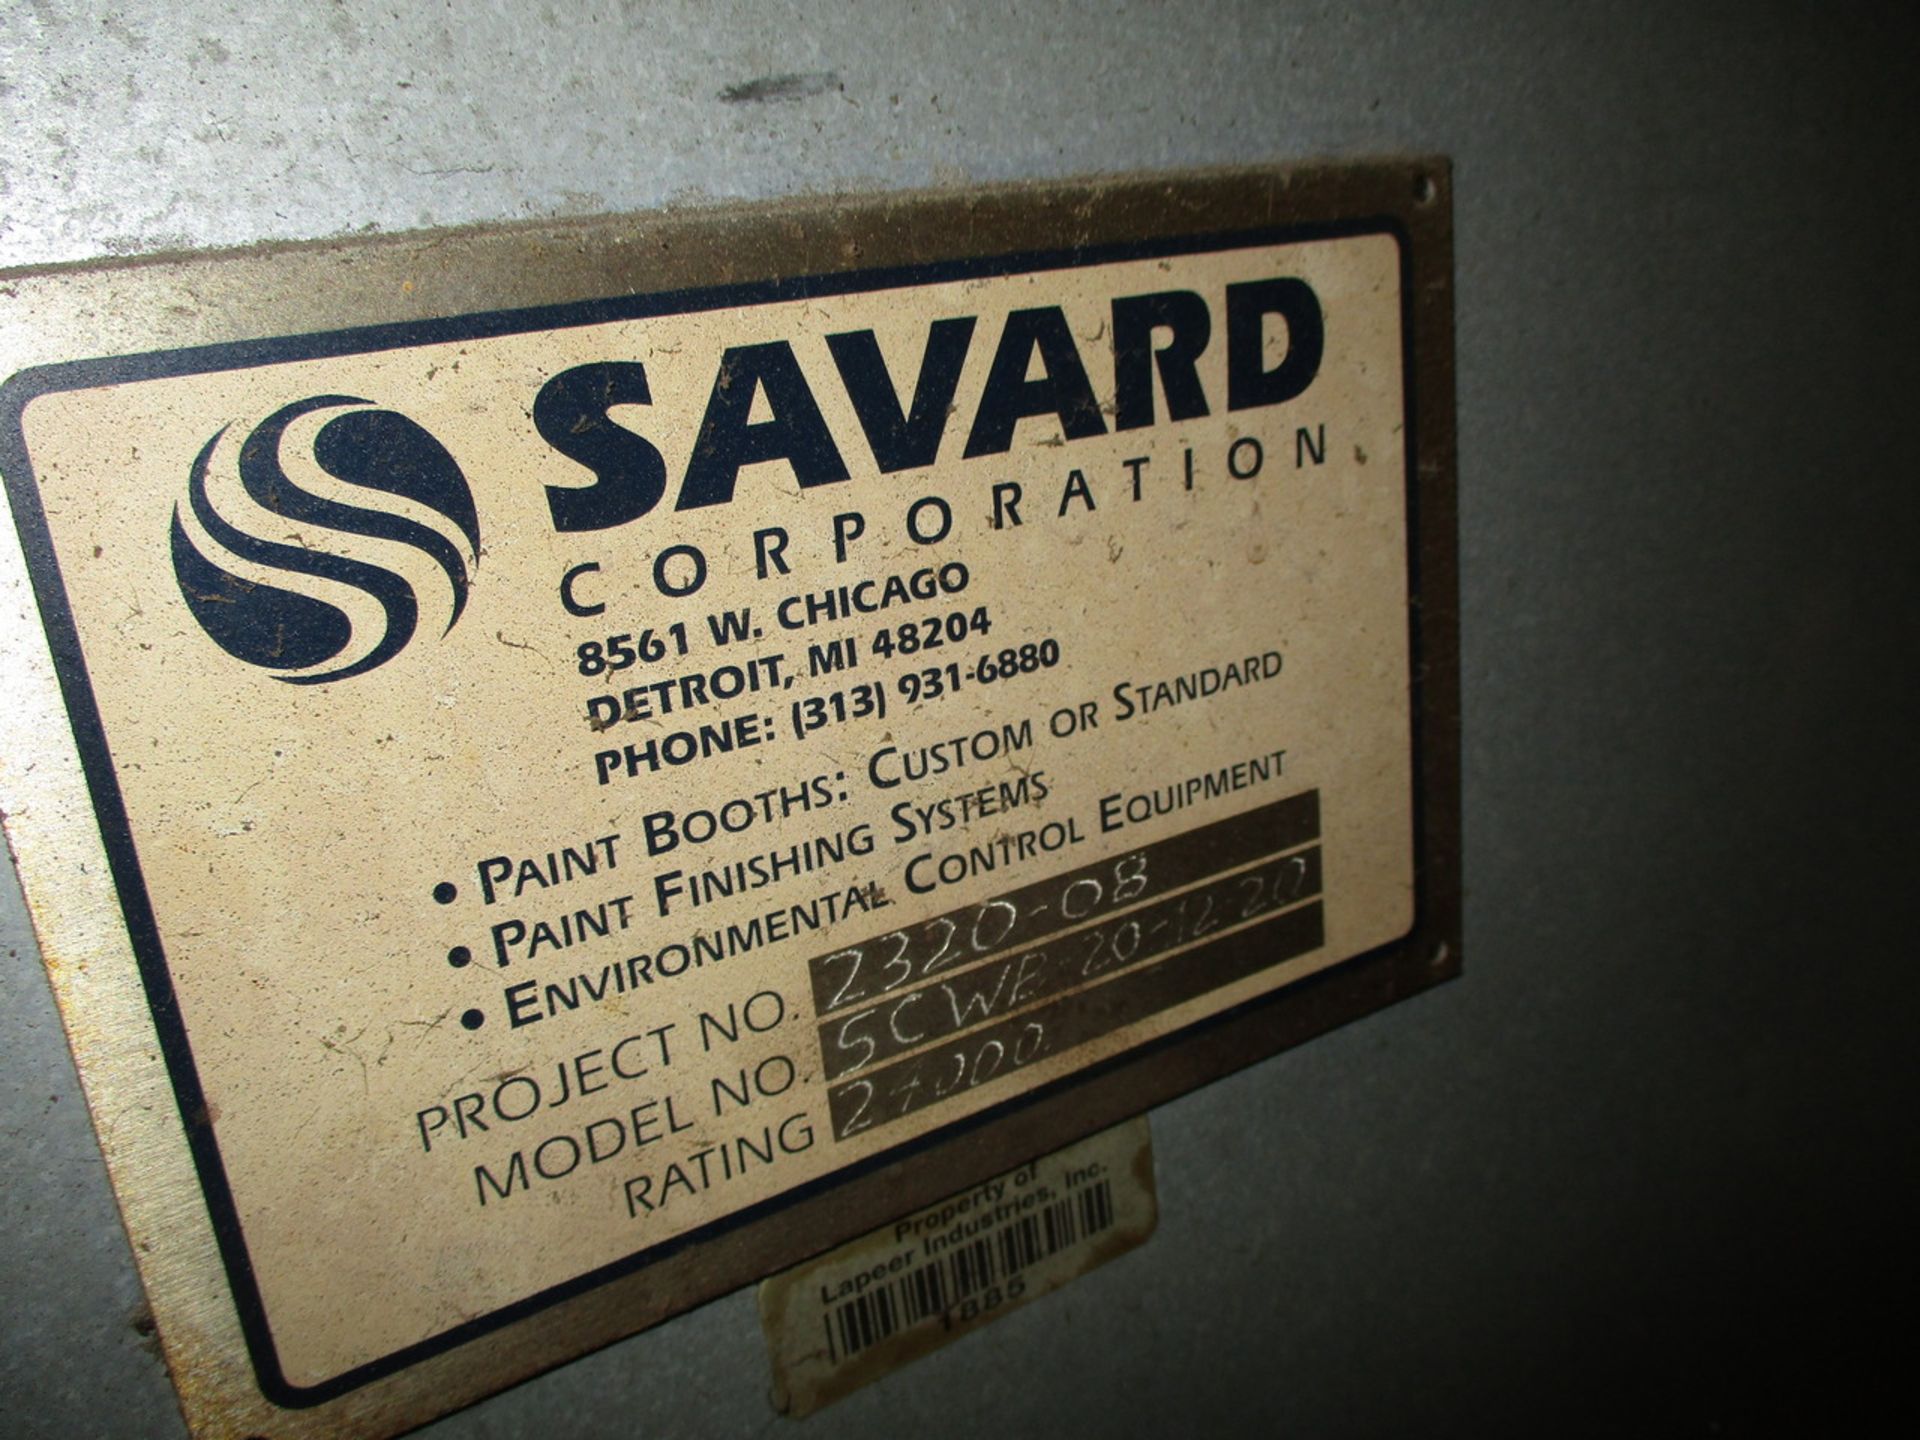 Savard 5CW-B-20-12-20 Wet Spray Paint Booth - Approx. Size 15' x 20' - Image 10 of 11